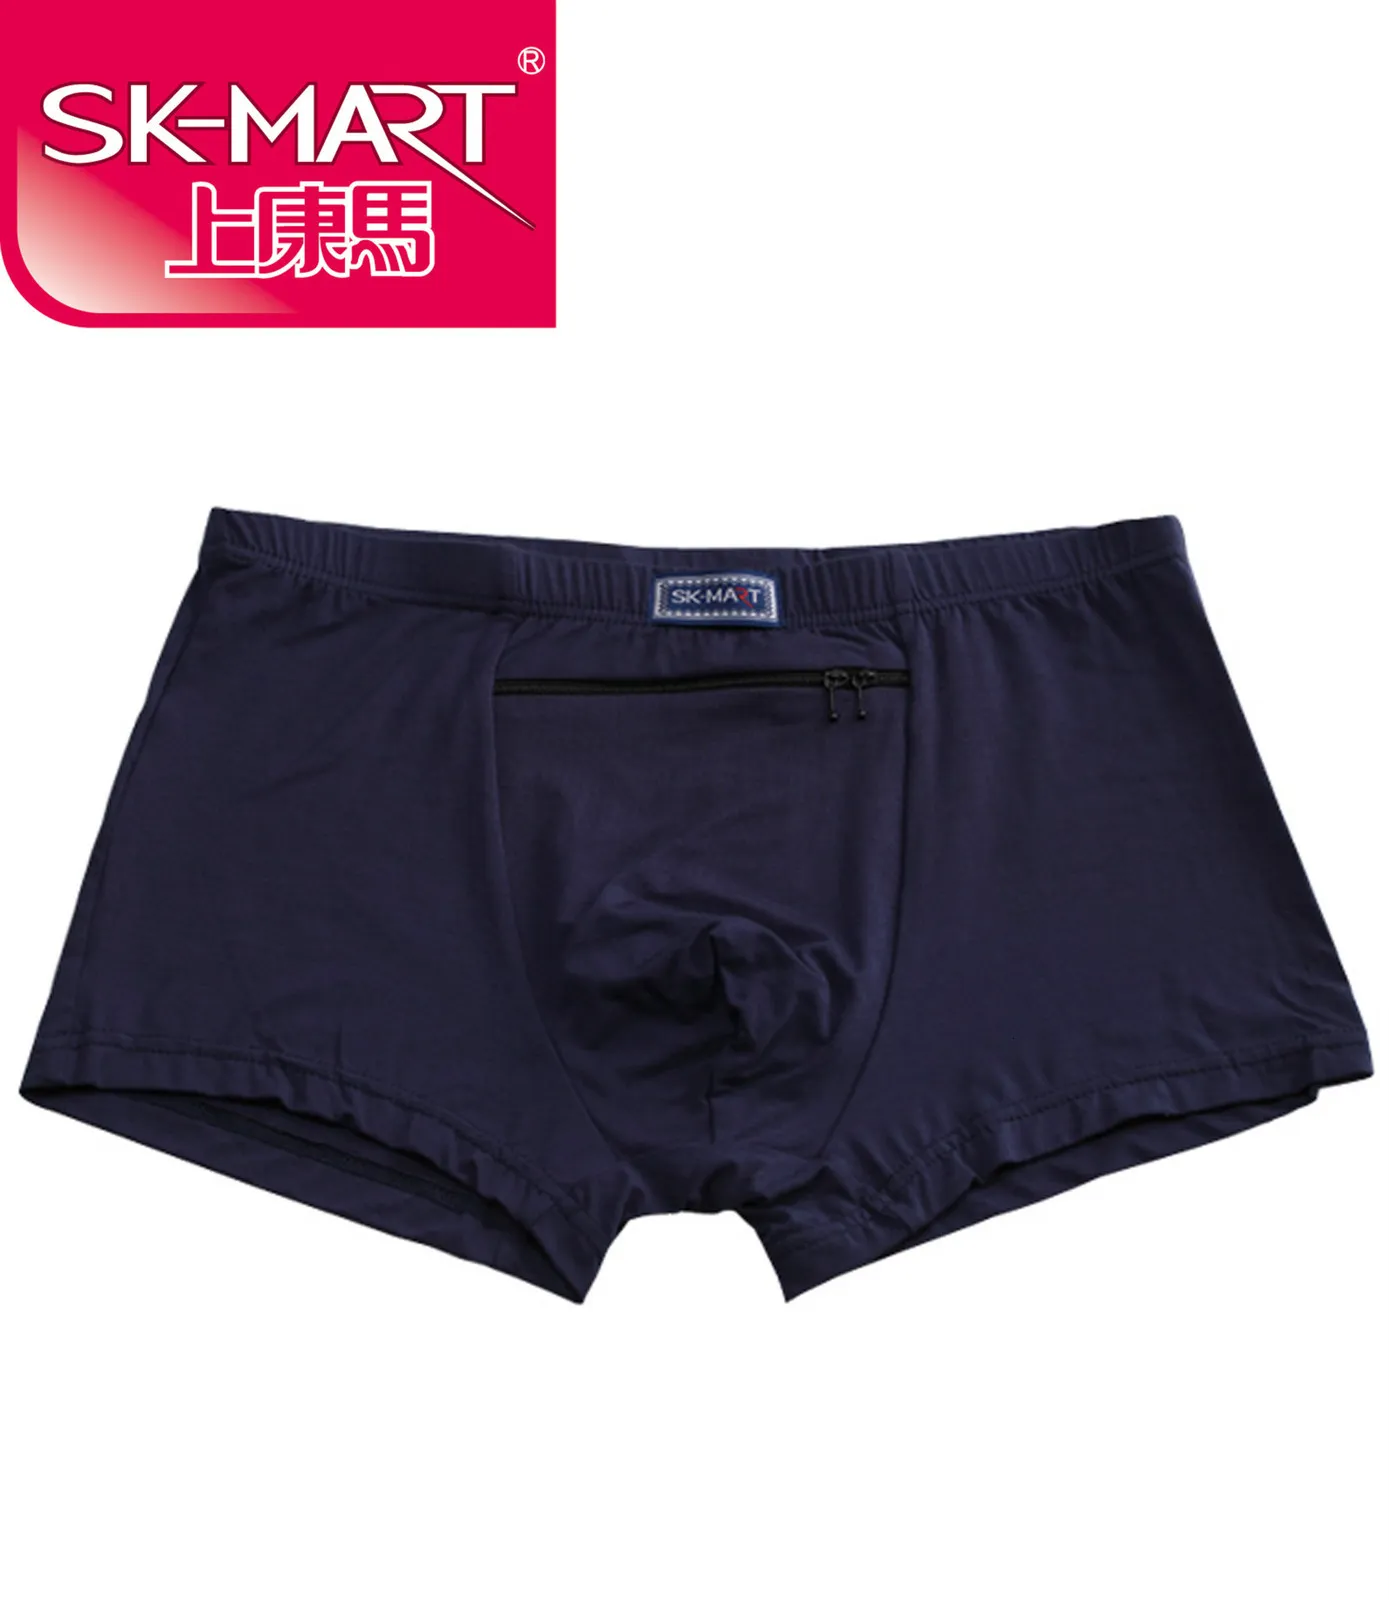 Mens Hidden Pocket Boxer Underwear Men Soft, Pickpocket Proof, And Safe For  Outdoor Play From Quan02, $10.99